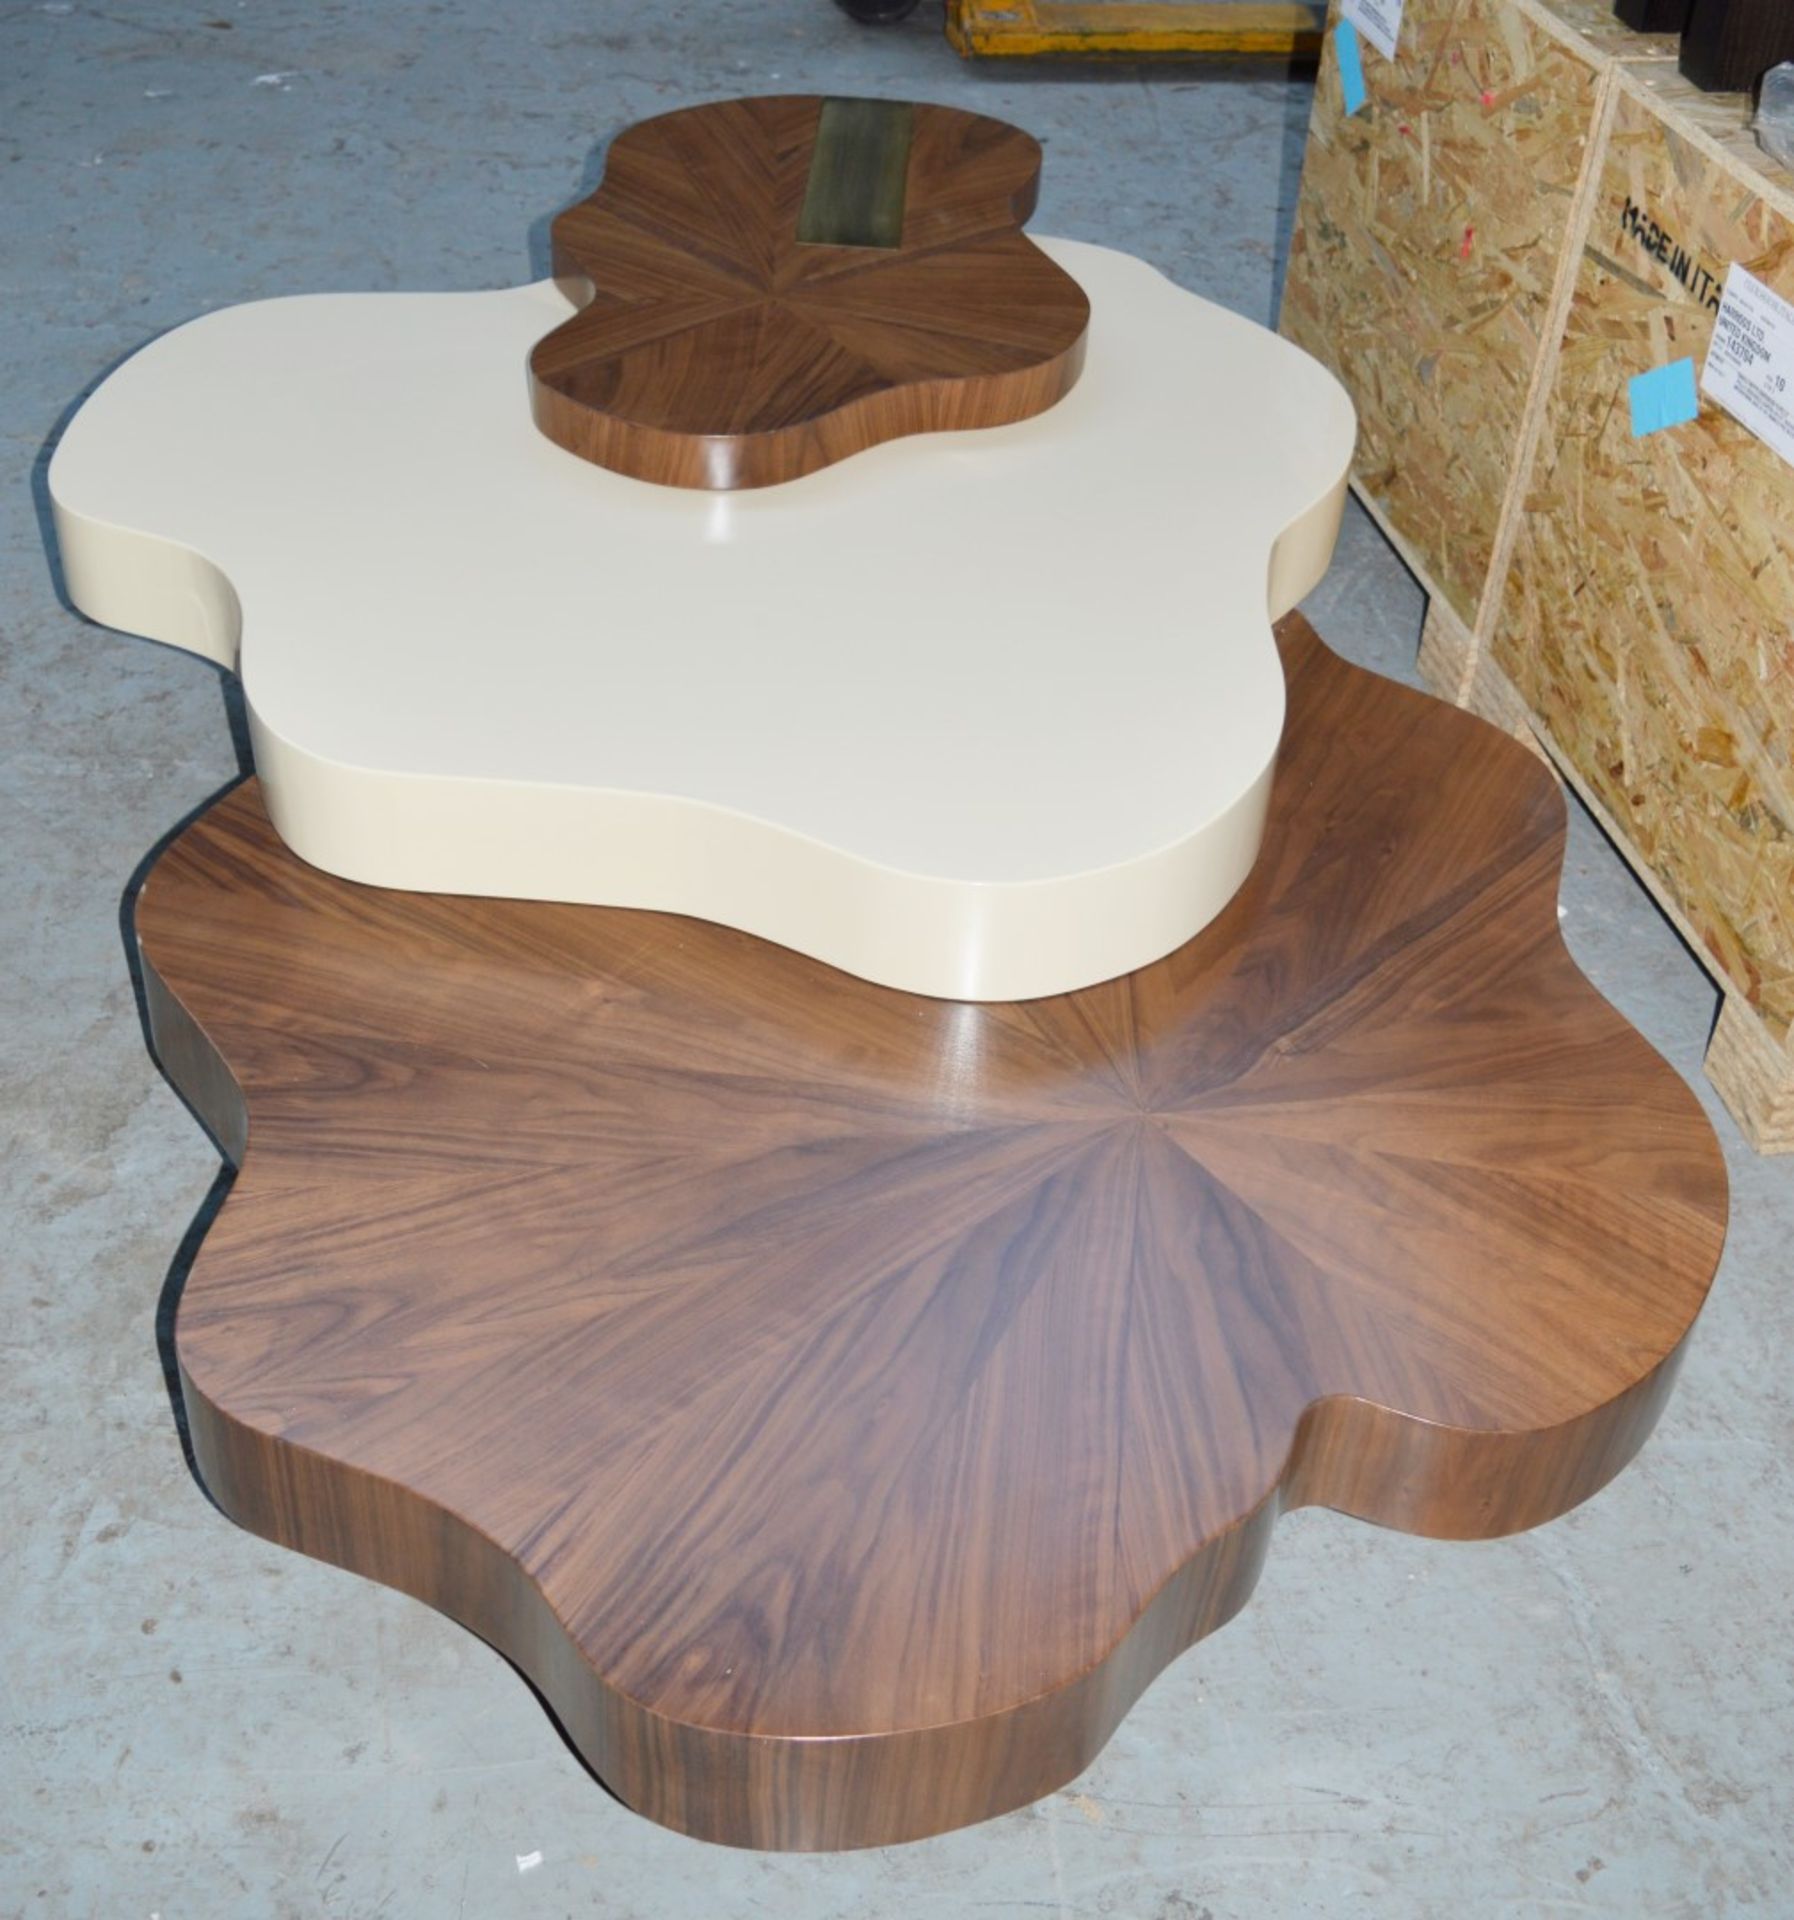 1 x Ginger & Jagger Nenhuphar Coffee Table - Urbanmint Design - Eye Catching Design - Walnut and - Image 11 of 15